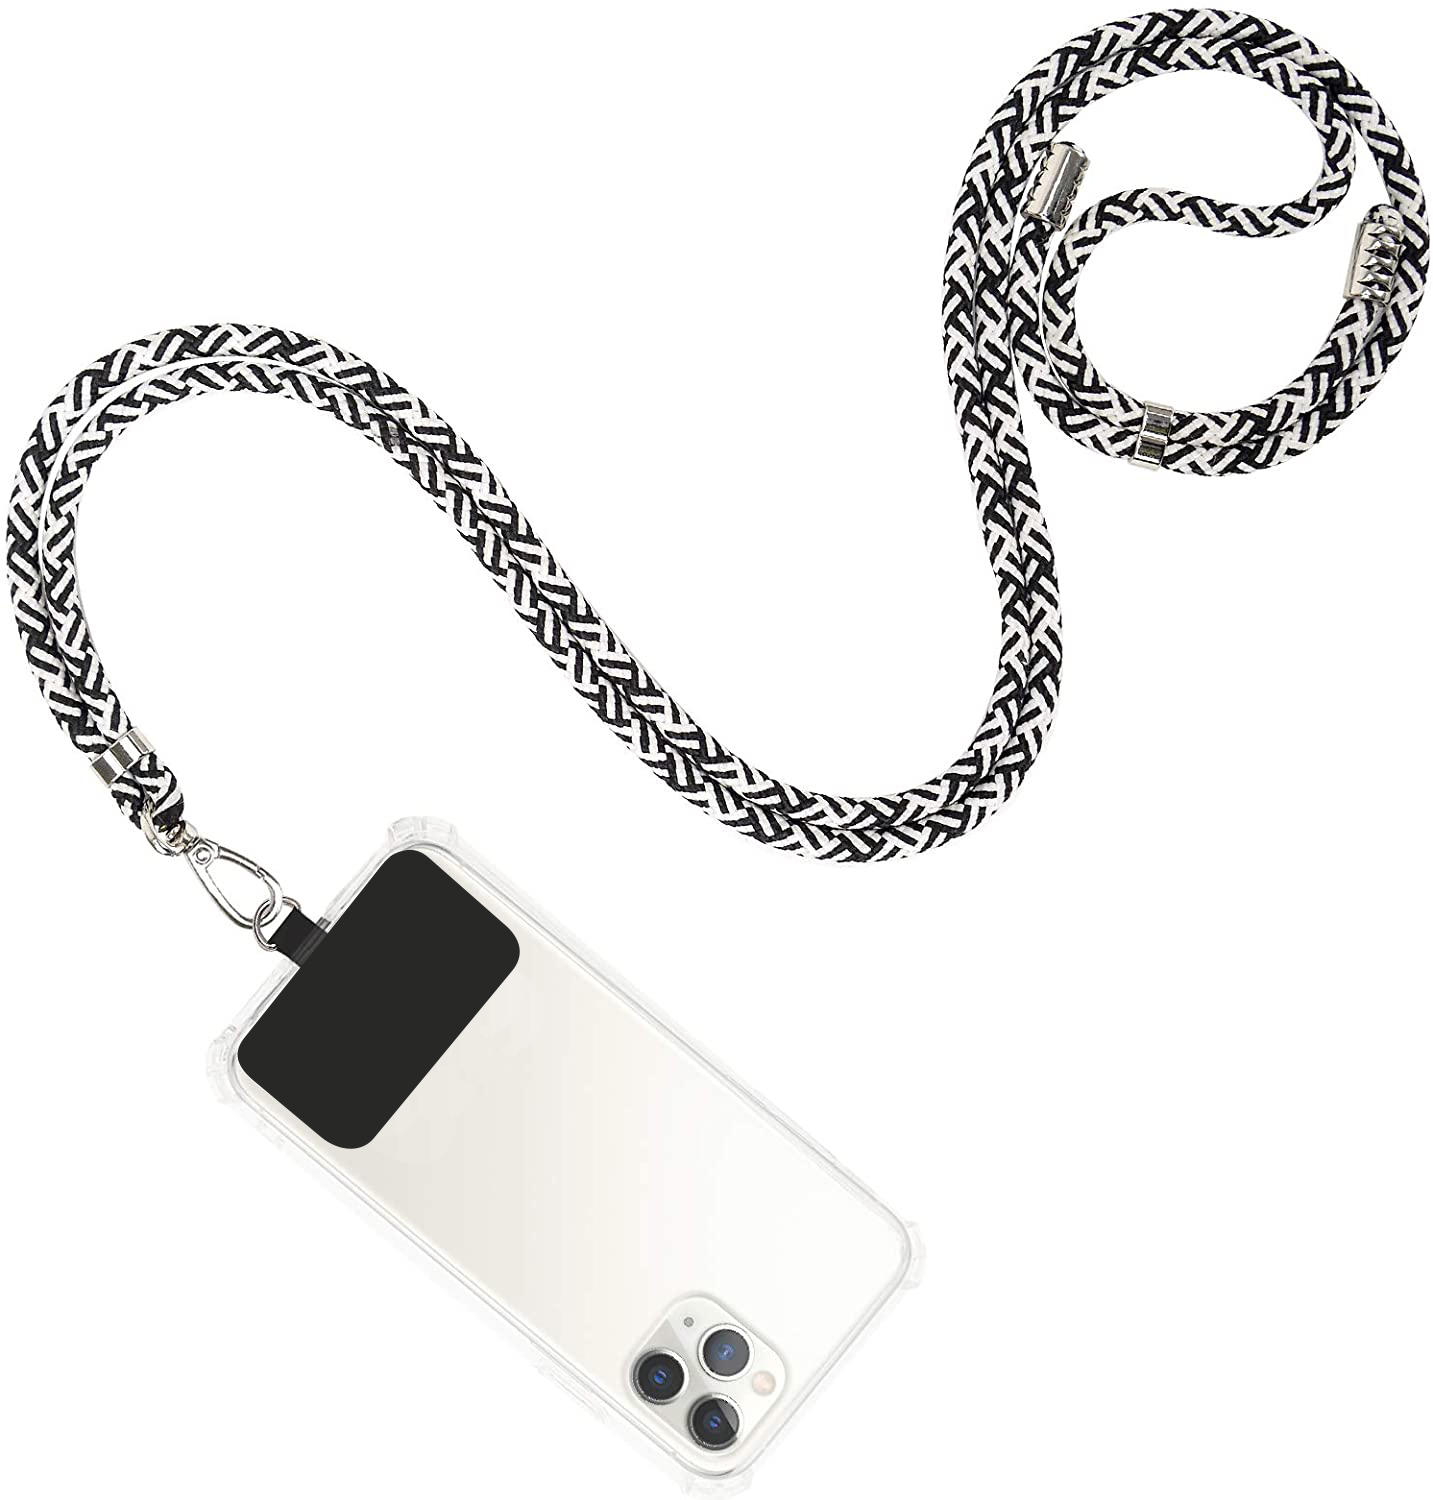 Phone Lanyard Compatible with all smartphone